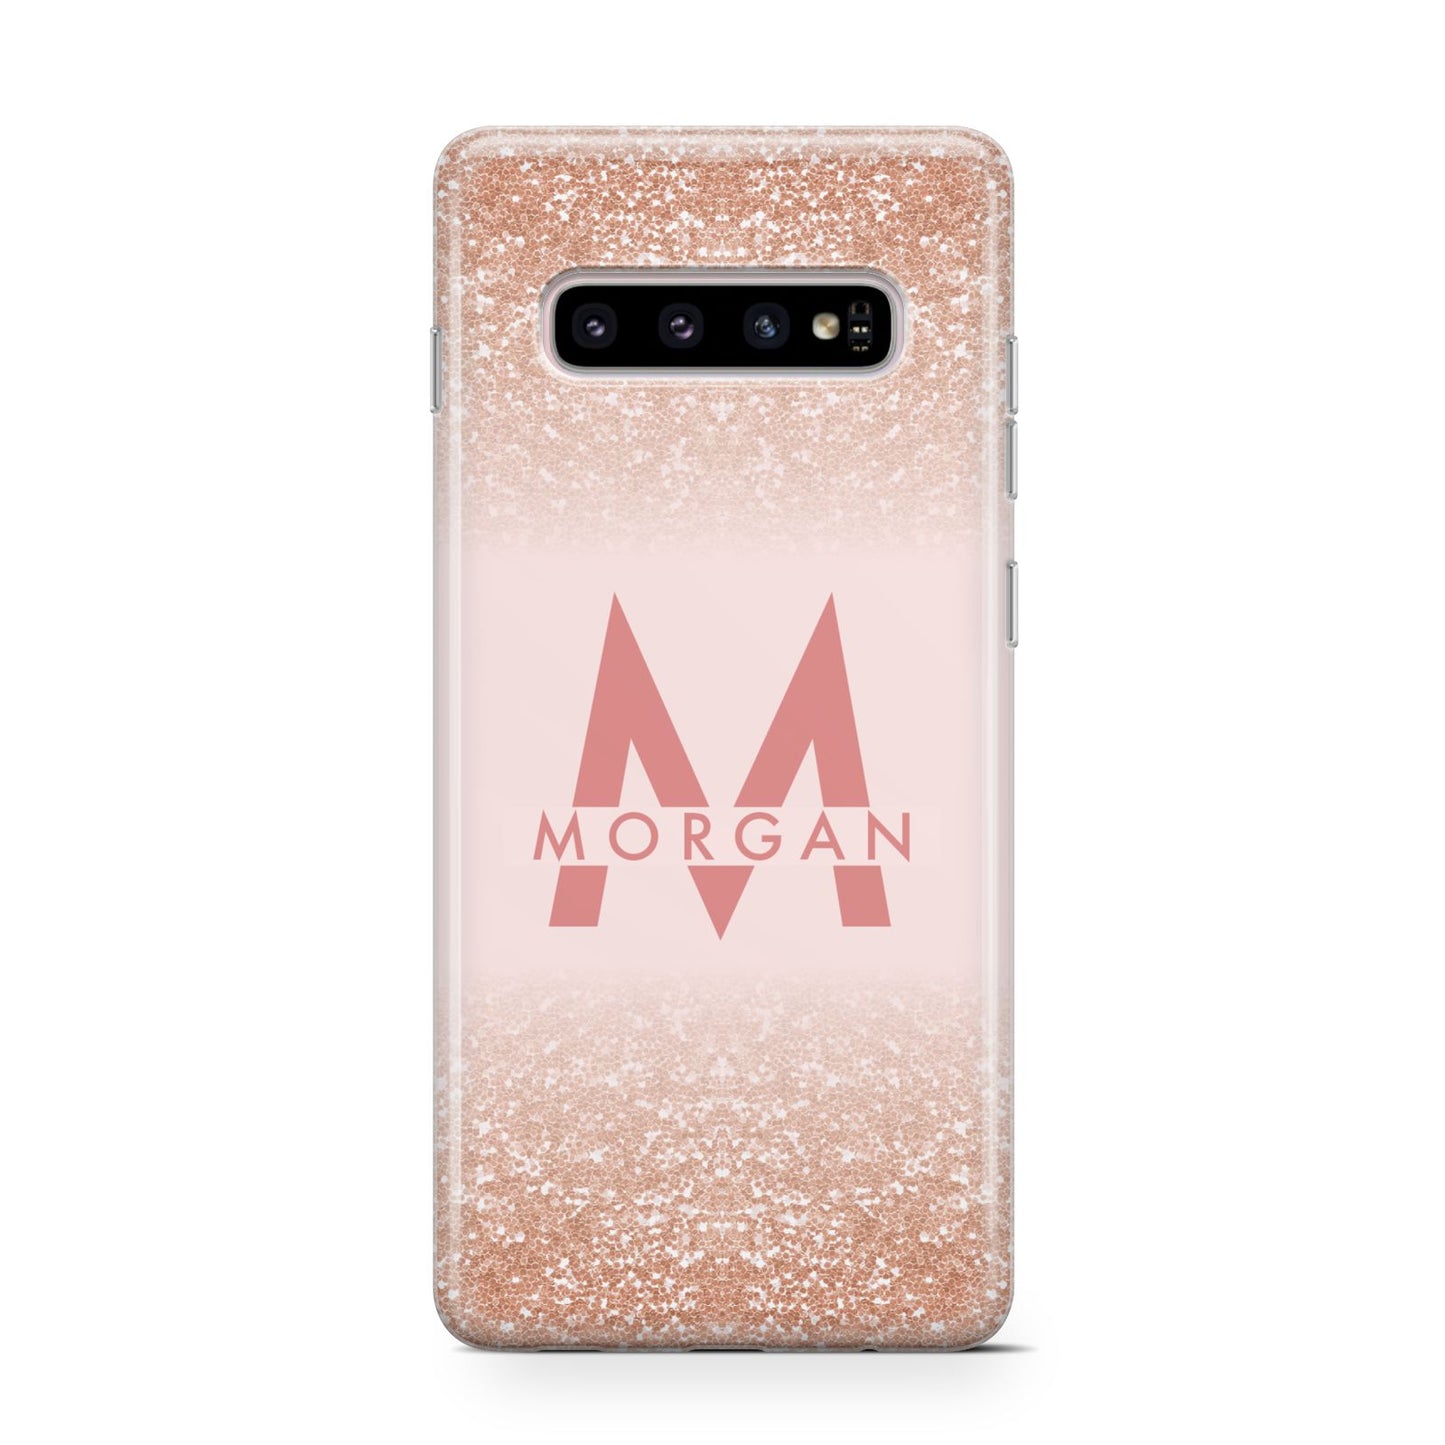 Personalised Printed Glitter Name Initials Samsung Galaxy S10 Case